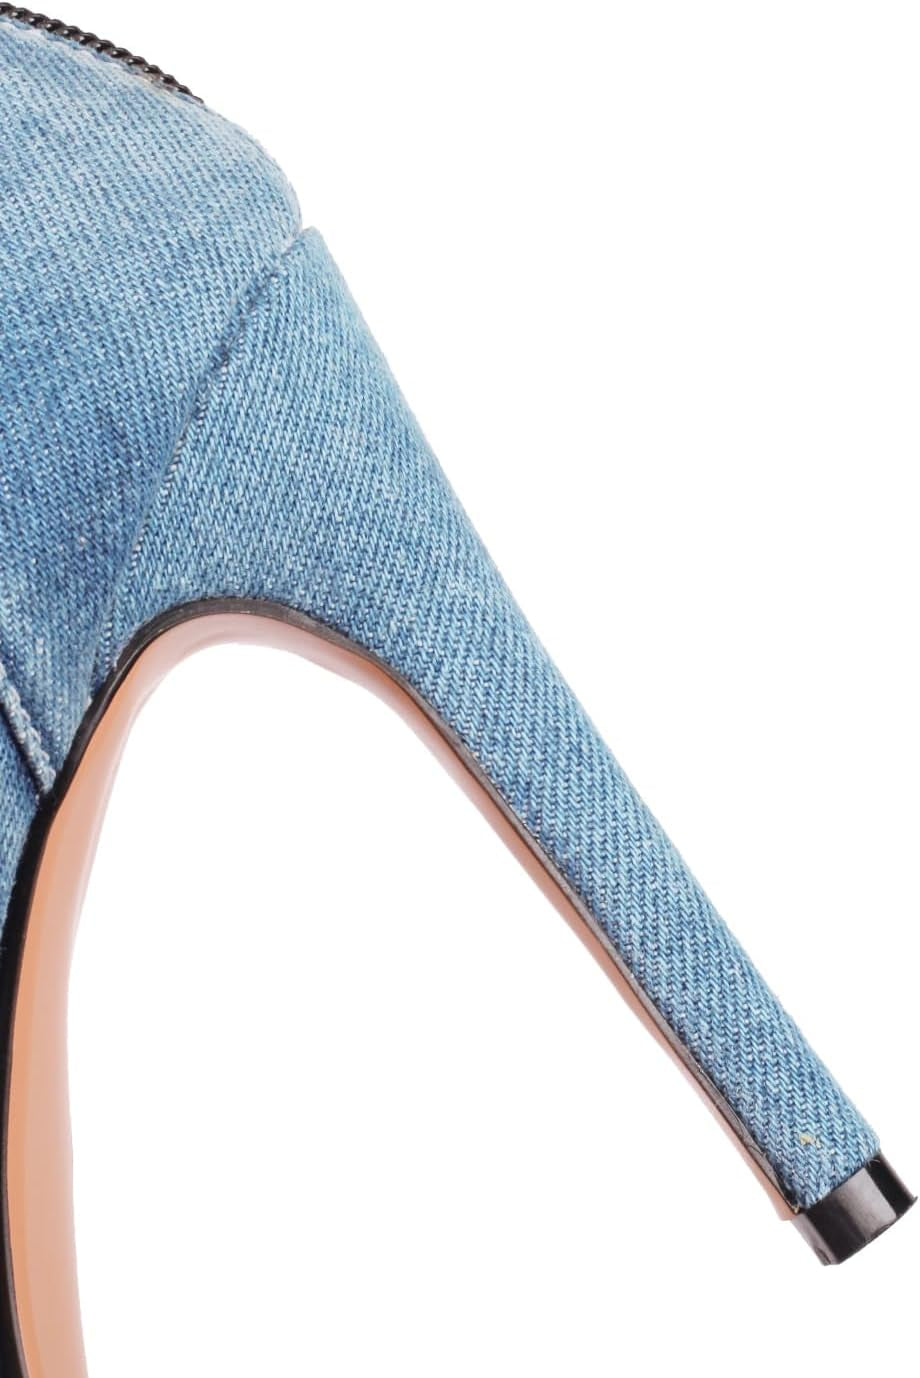 Chic Denim Peep Toe Heeled Sandals with Ankle Strap 